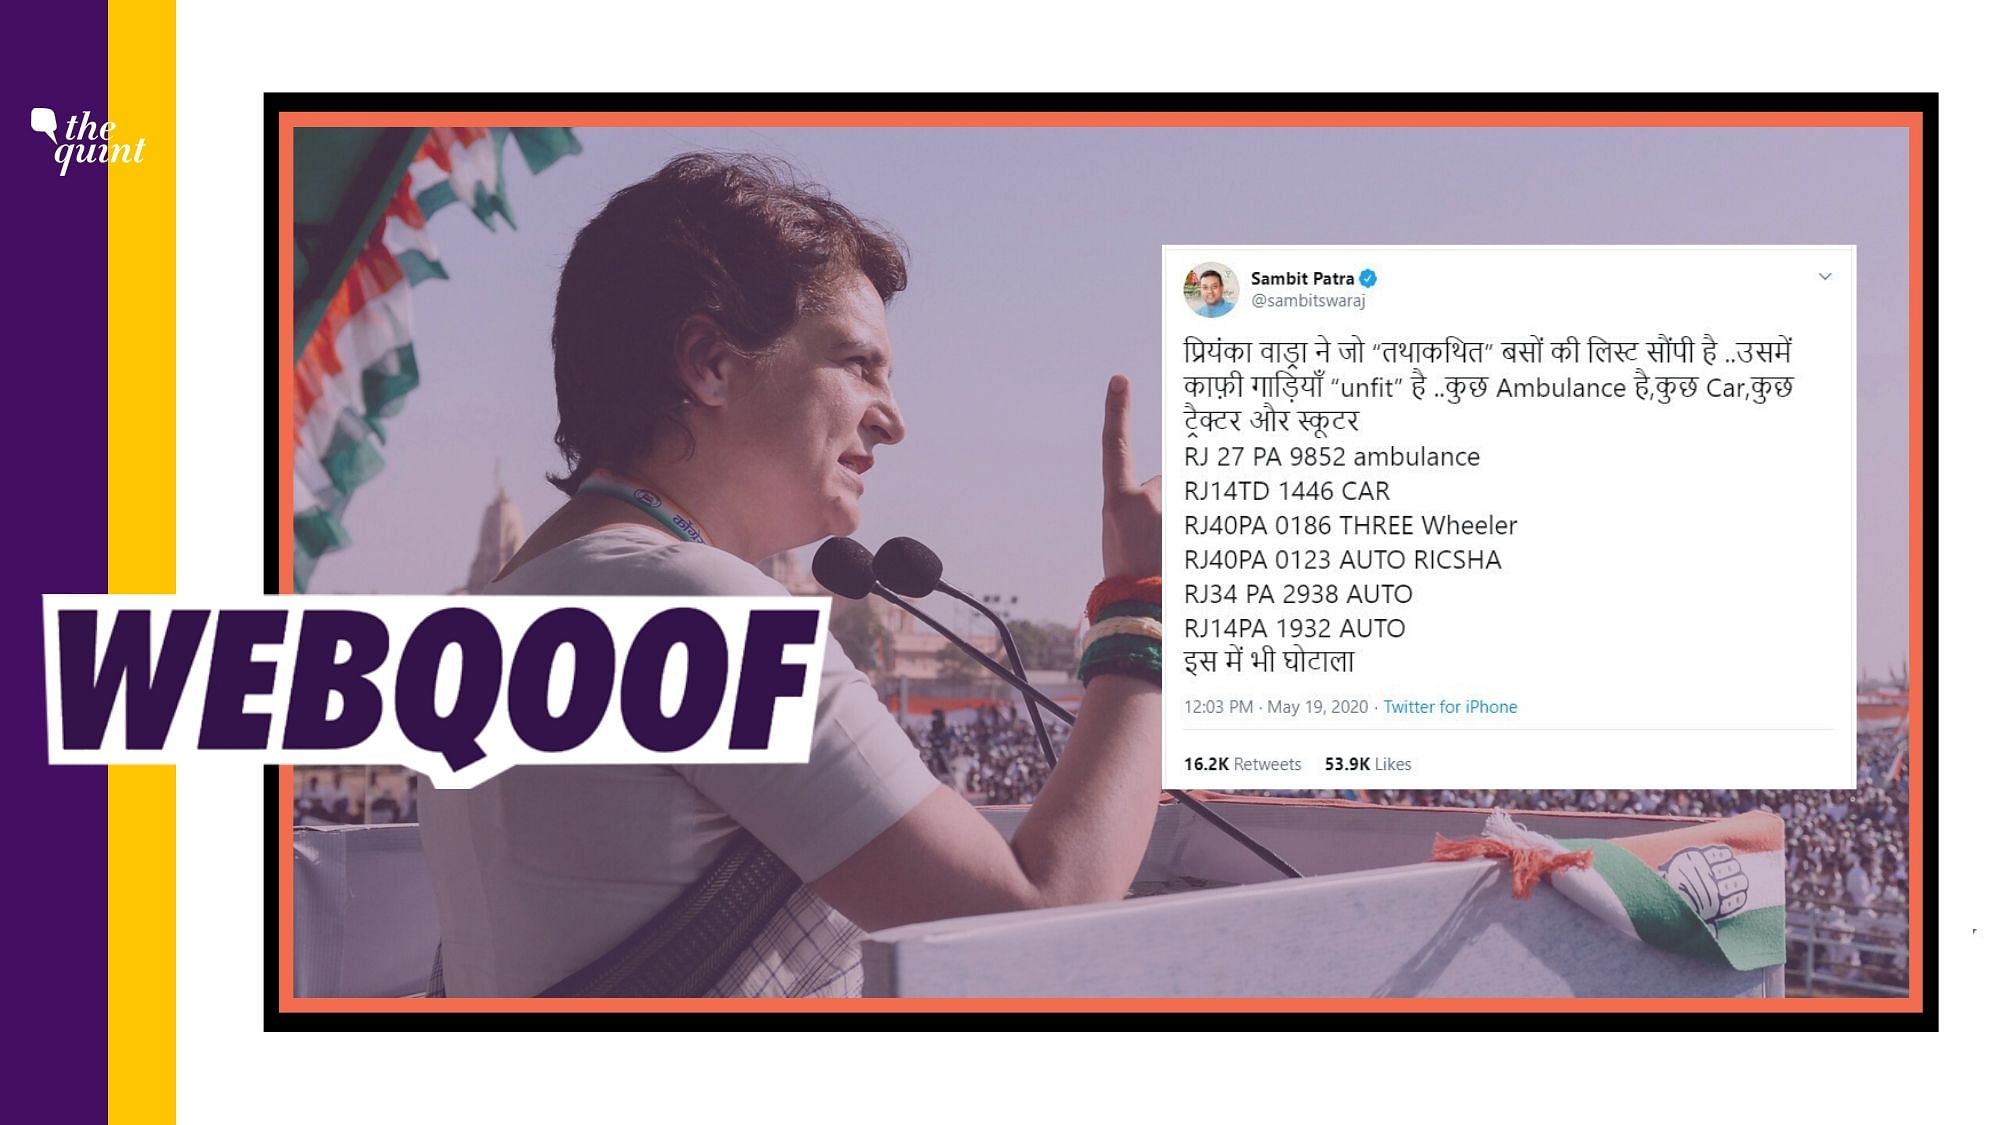 BJP leader Sambit Patra on Twitter shared a list of six vehicle registration numbers with a claim that they are of buses which were arranged by Priyanka Gandhi, saying that none of the six vehicles is a bus.